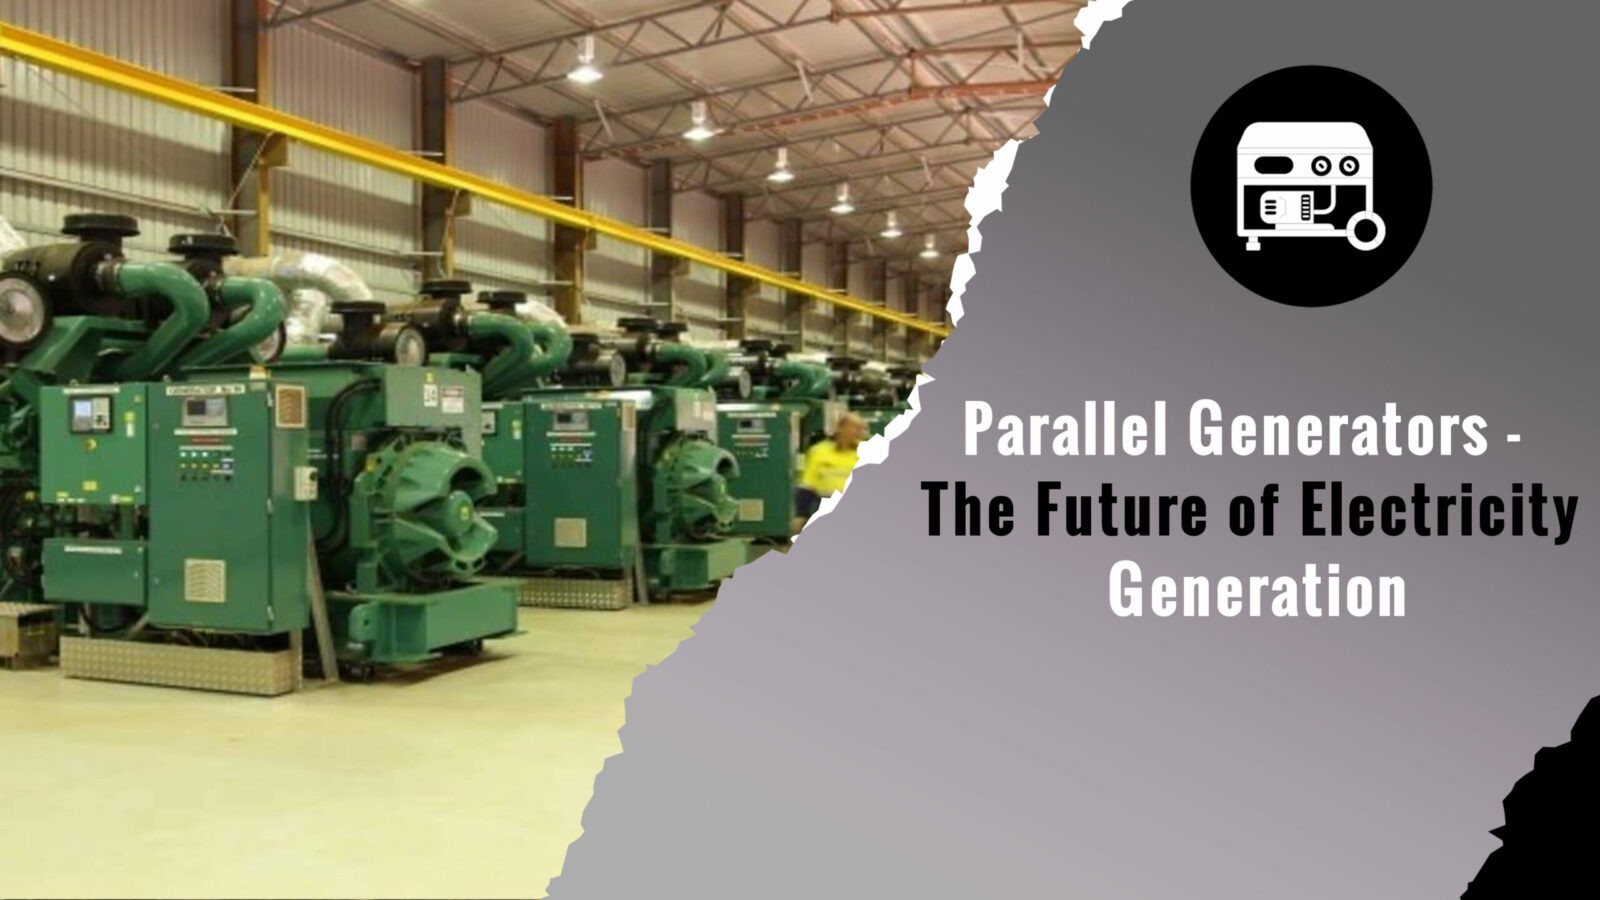 Parallel Generators - The Future of Electricity Generation